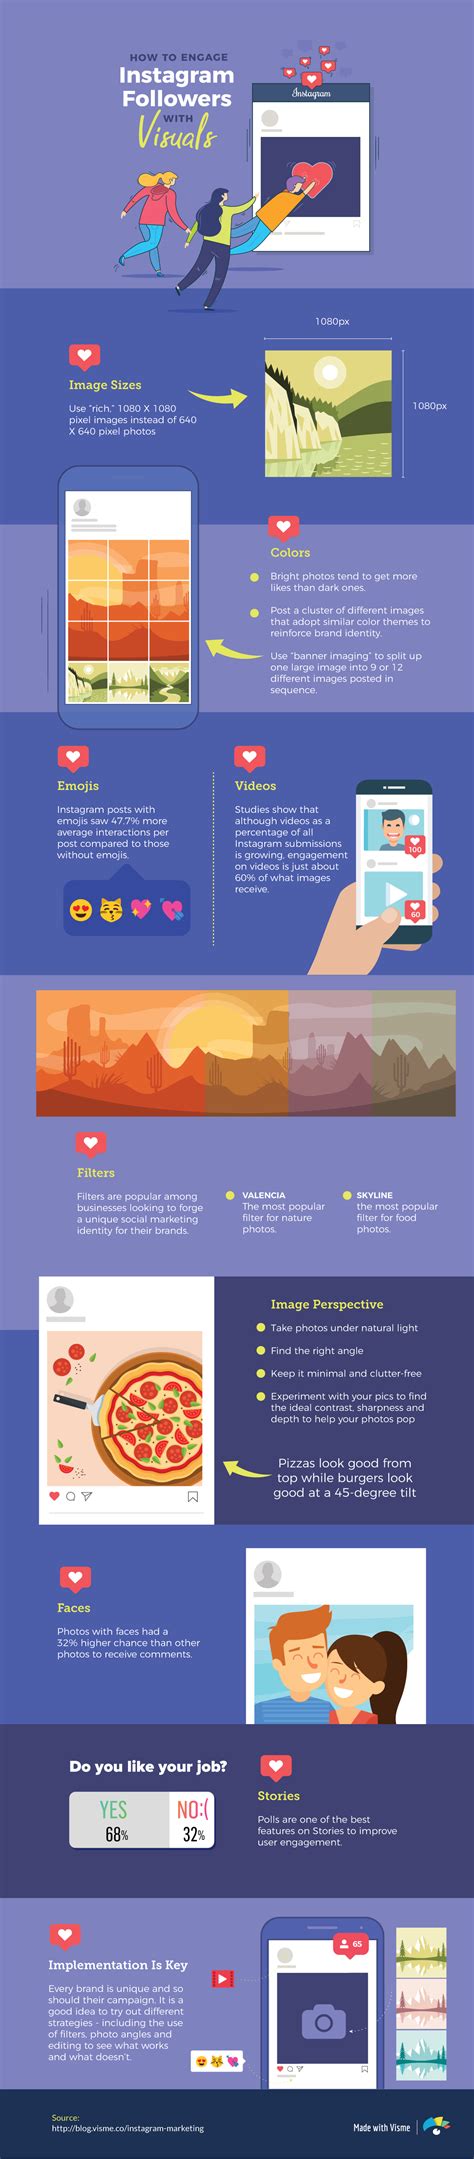 instagram marketing guide   engage followers  visuals